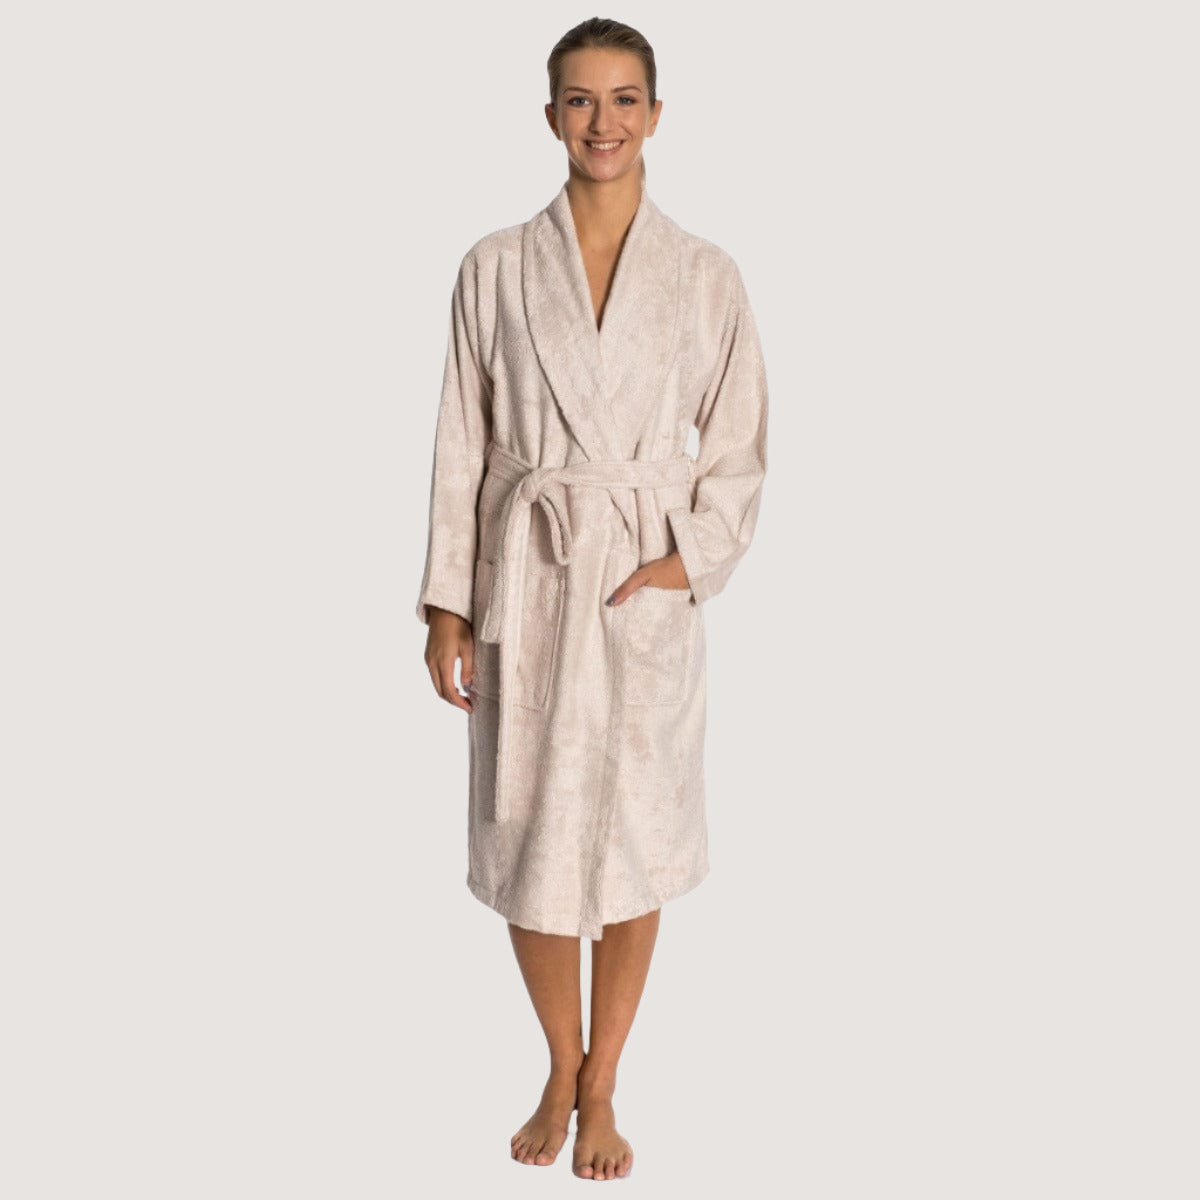 Amazon.com: Linen bathrobe with a hood, soft linen robe, waffle linen robe,  long morning gown, dressing gown, linen clothing, eco linen, WHITE WAFFLE :  Handmade Products